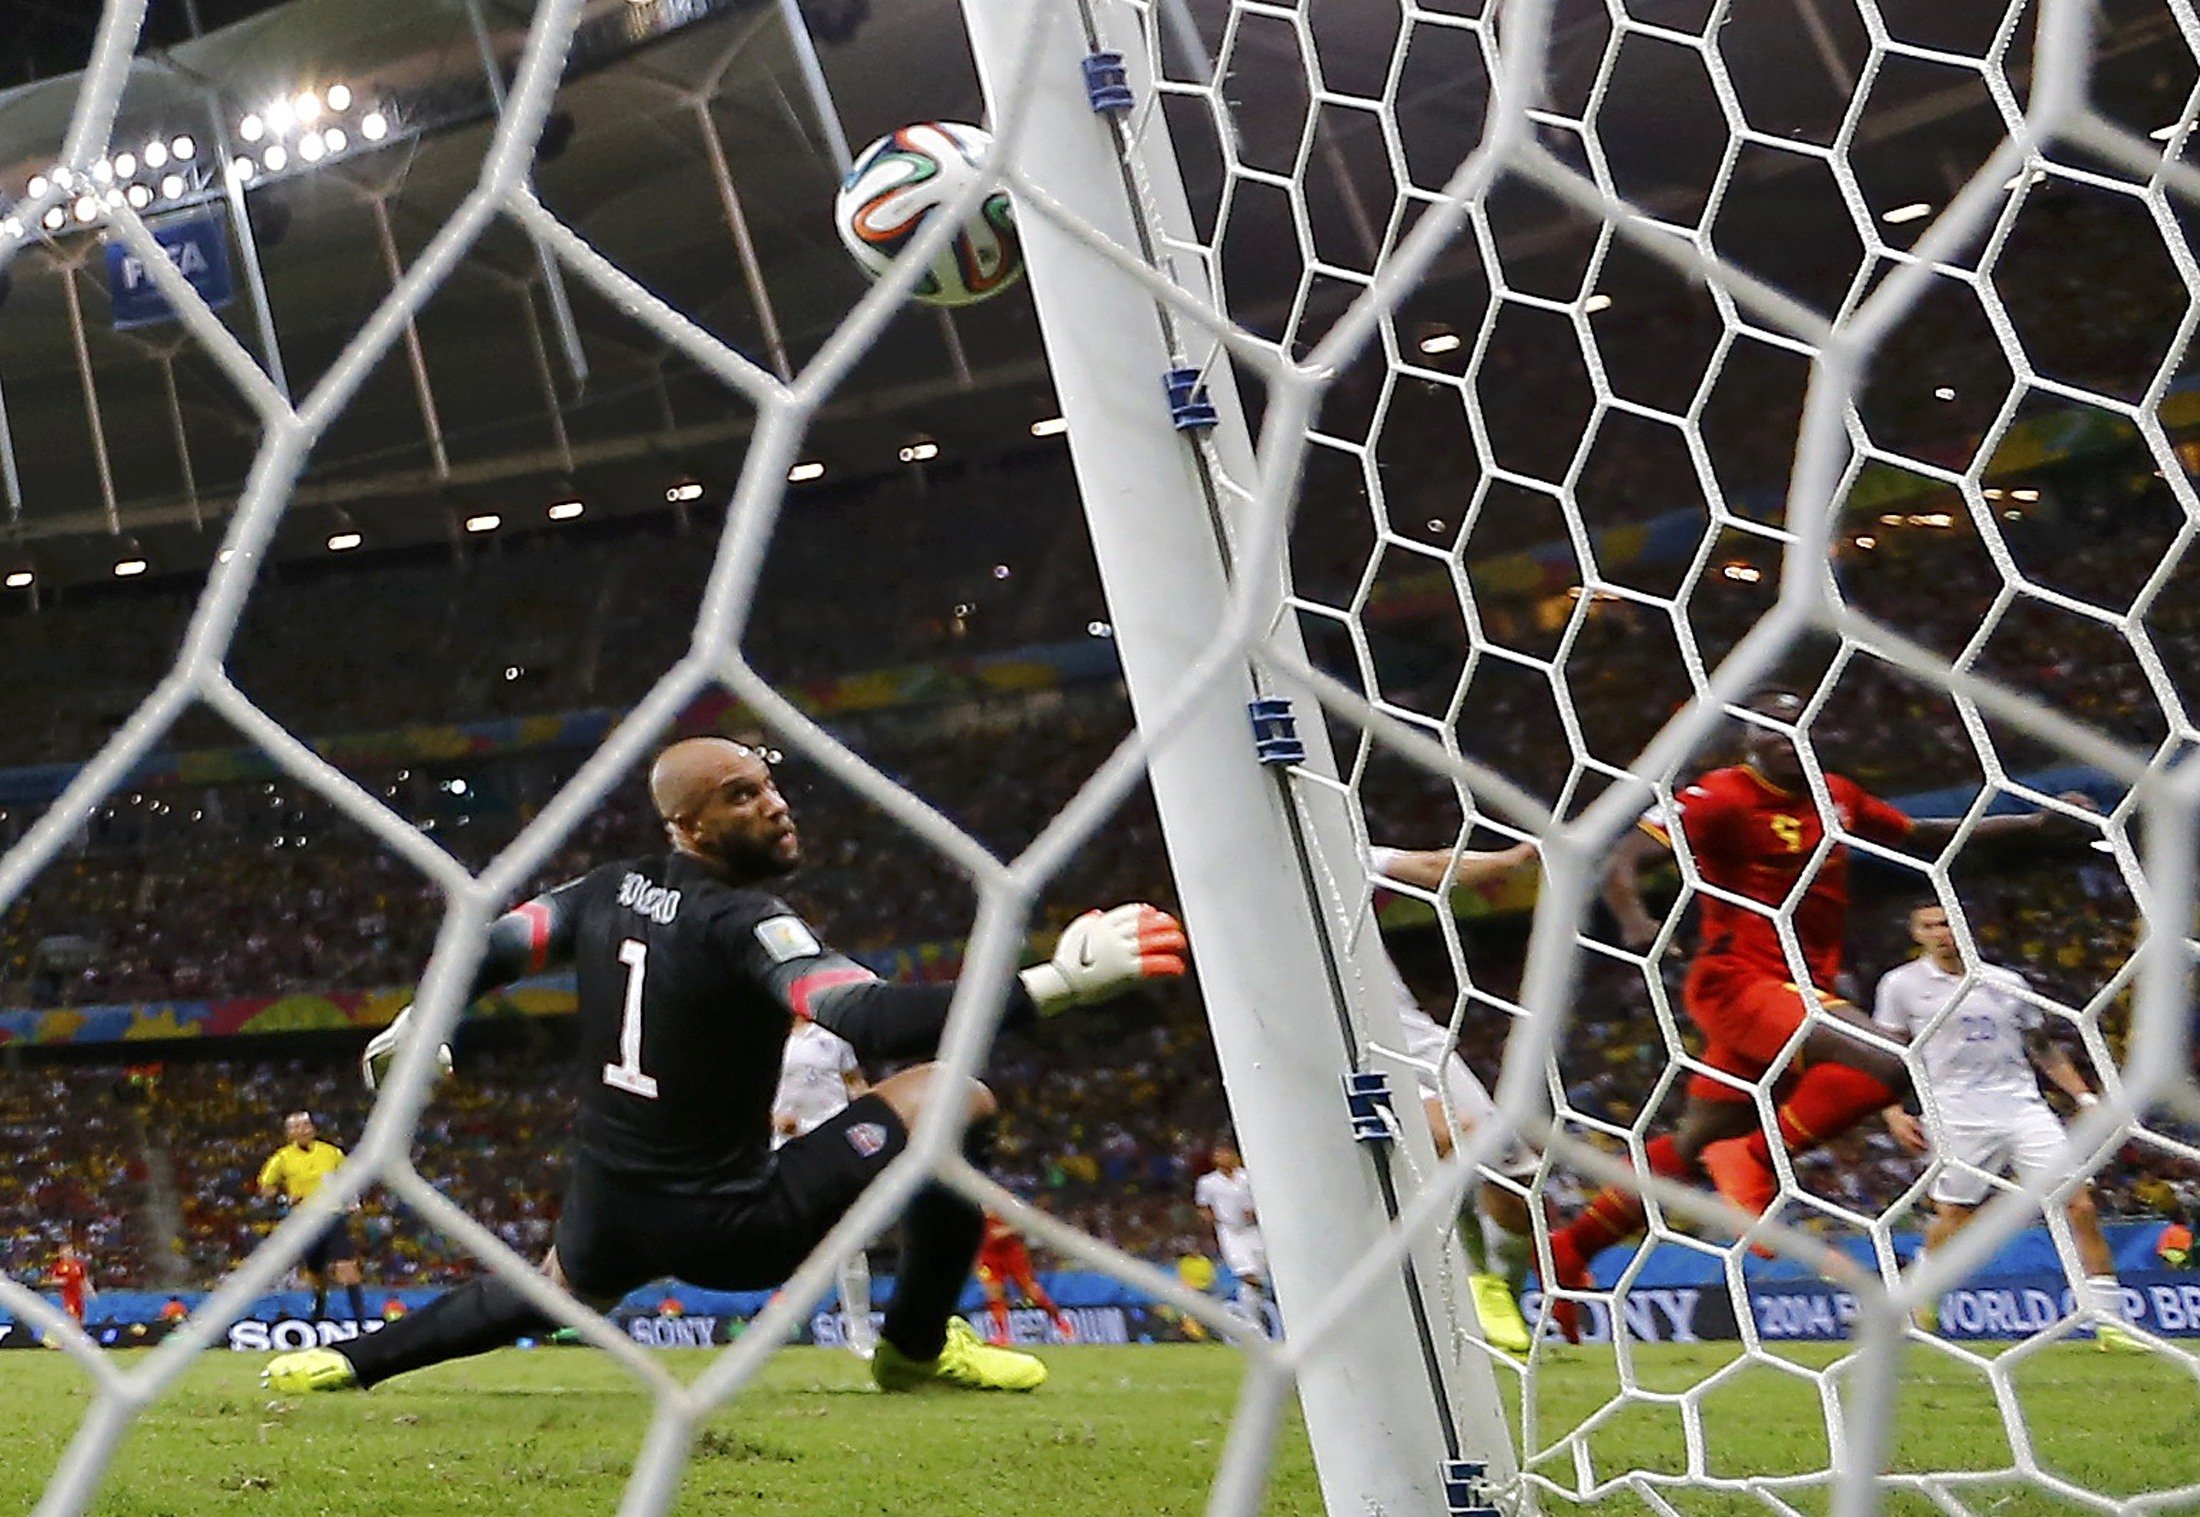 Belgium's Romelu Lukaku scores his team's second goal of the match past Tim Howard of the U.S. at the Fonte Nova arena in Salvador, Brazil, on July 1, 2014